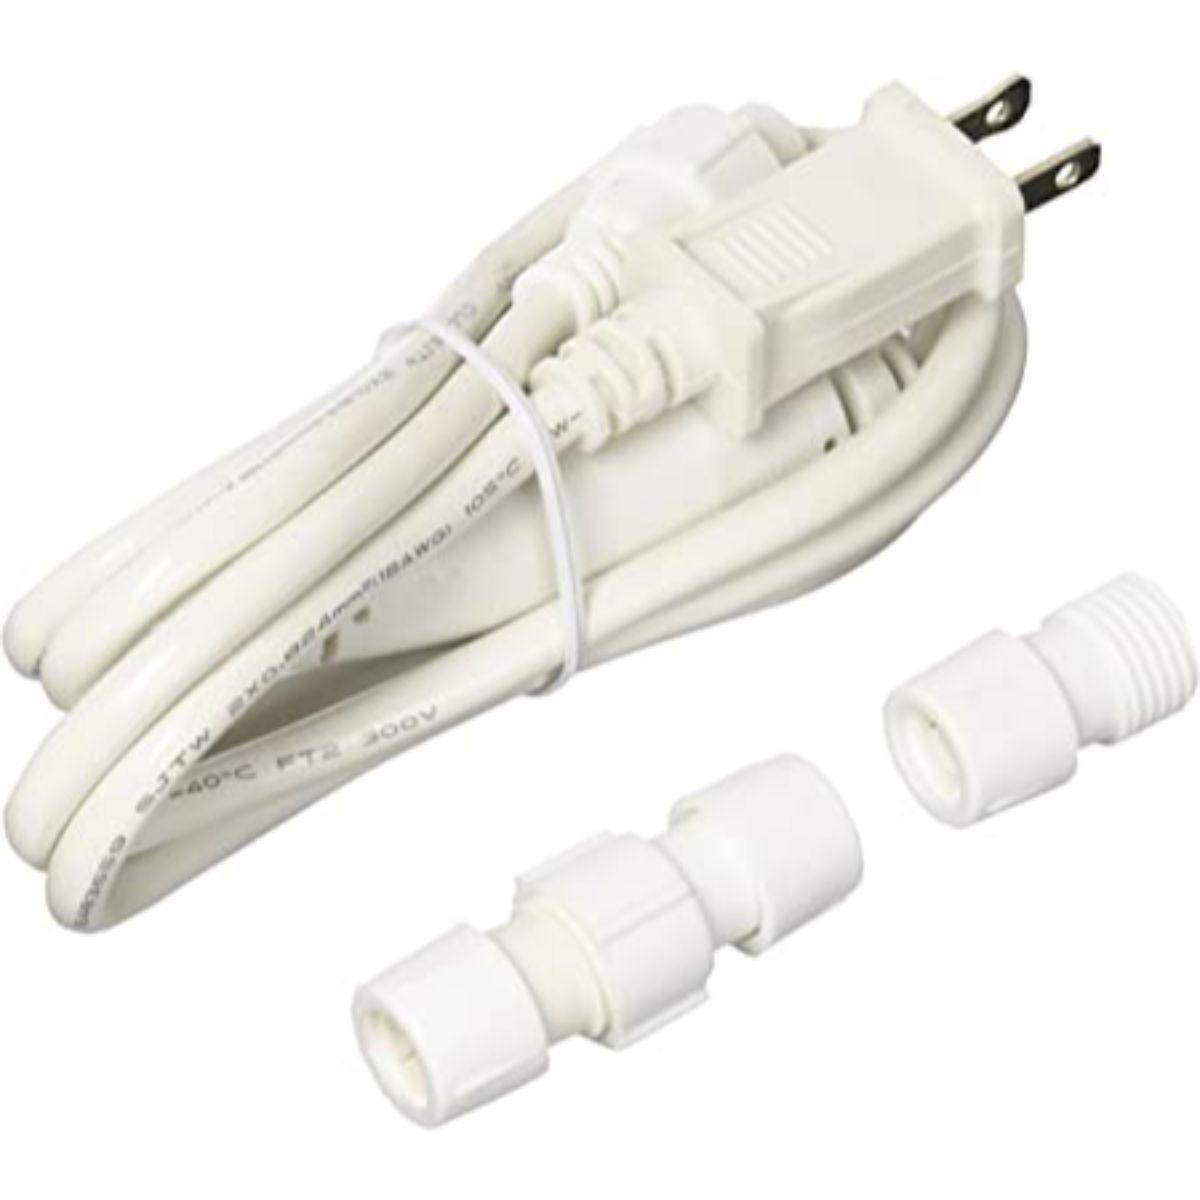 Flexbrite 5ft Power Connection Kit with Plug